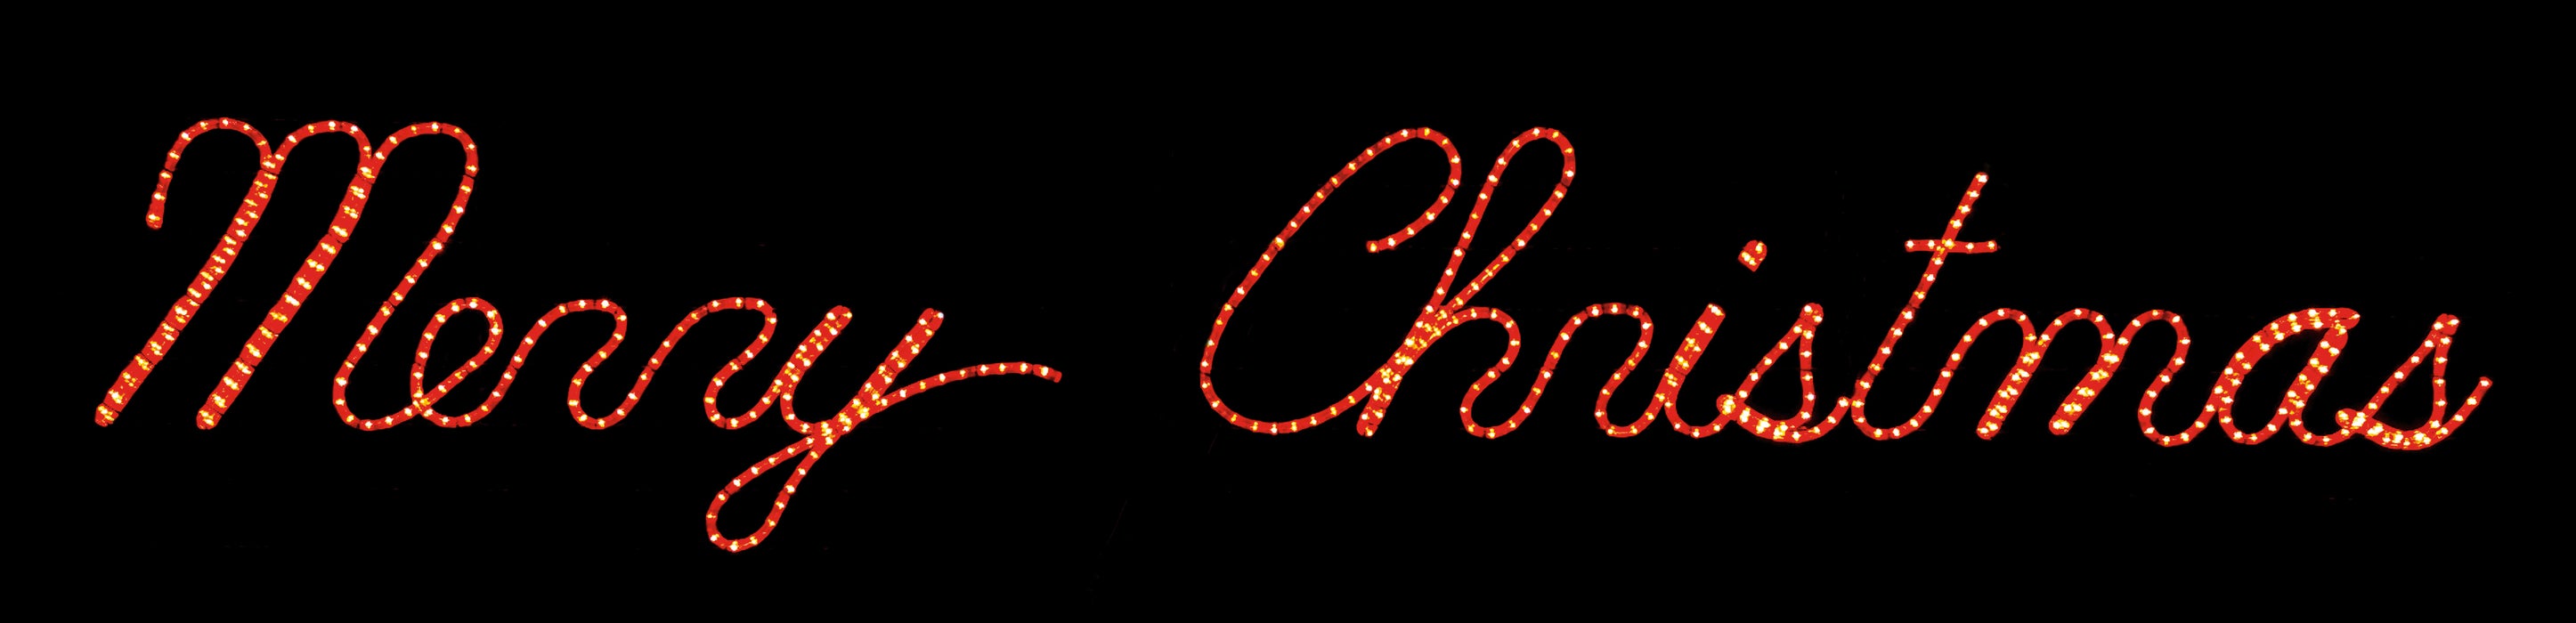 commercial-grade, outdoor, sign, script, merry Christmas, holiday, LED, rope, light, quality, durable, traditional, yard motif, 2021